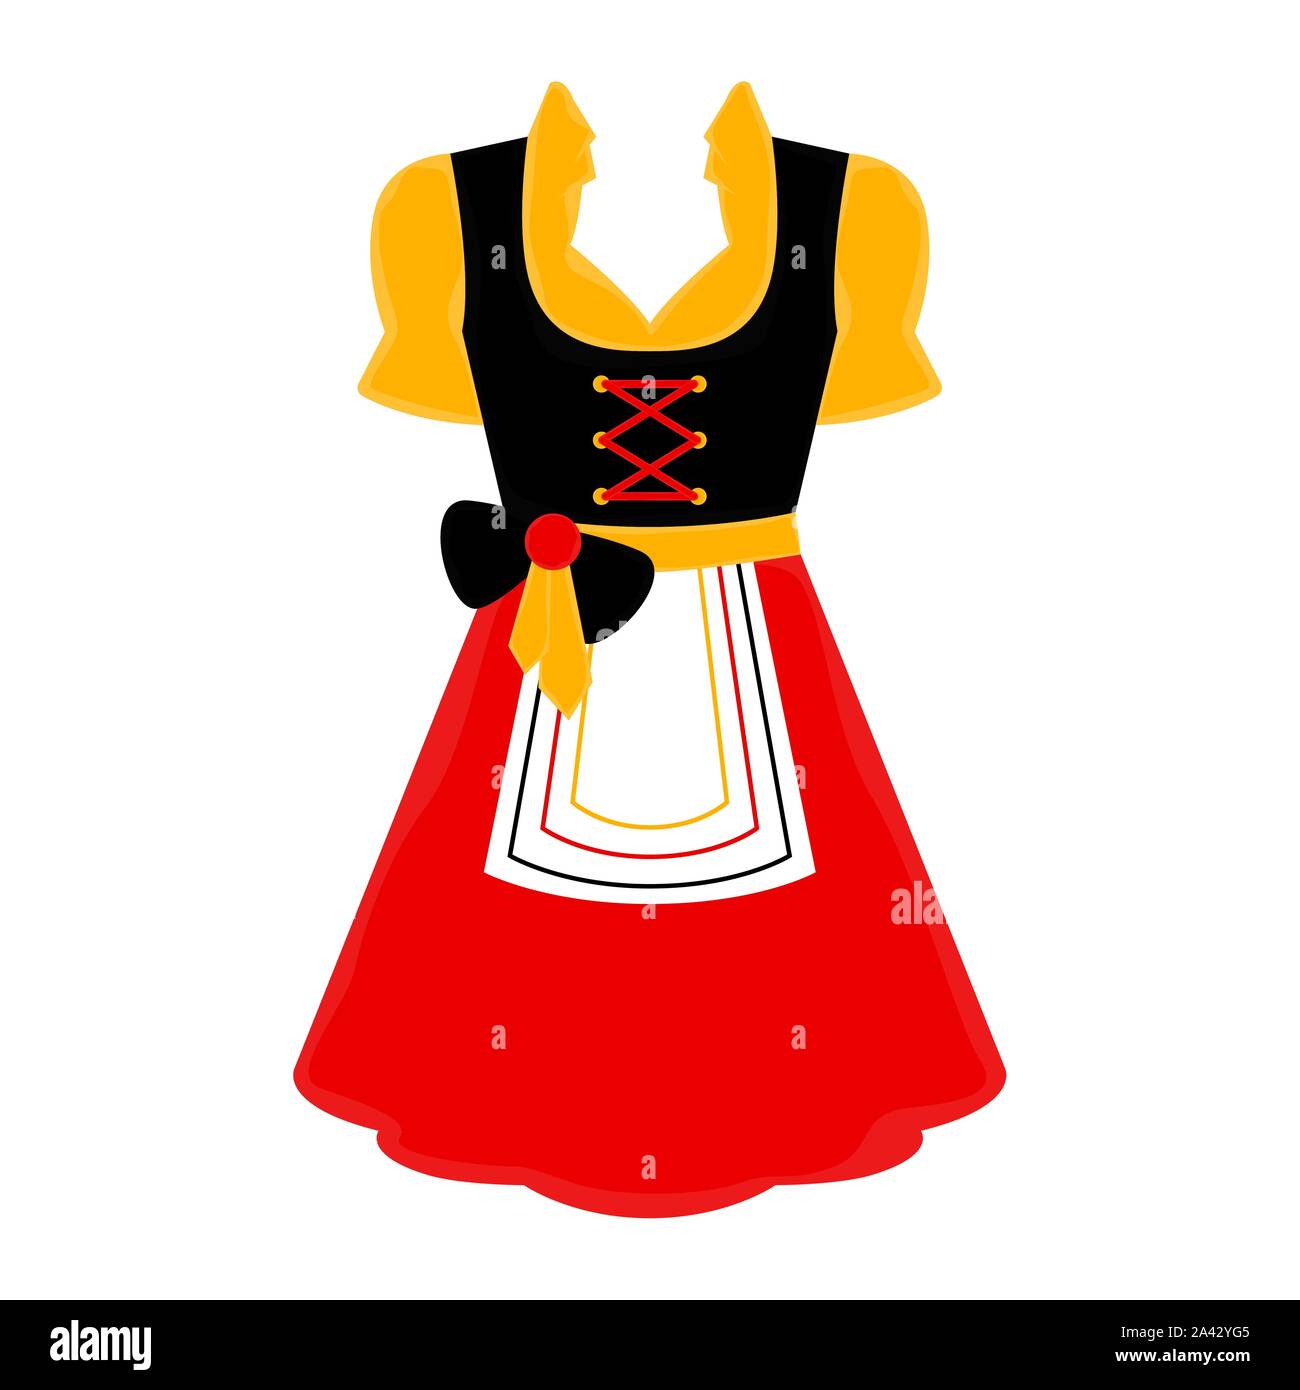 Isolated traditional oktoberfest dress icon over a white background ...